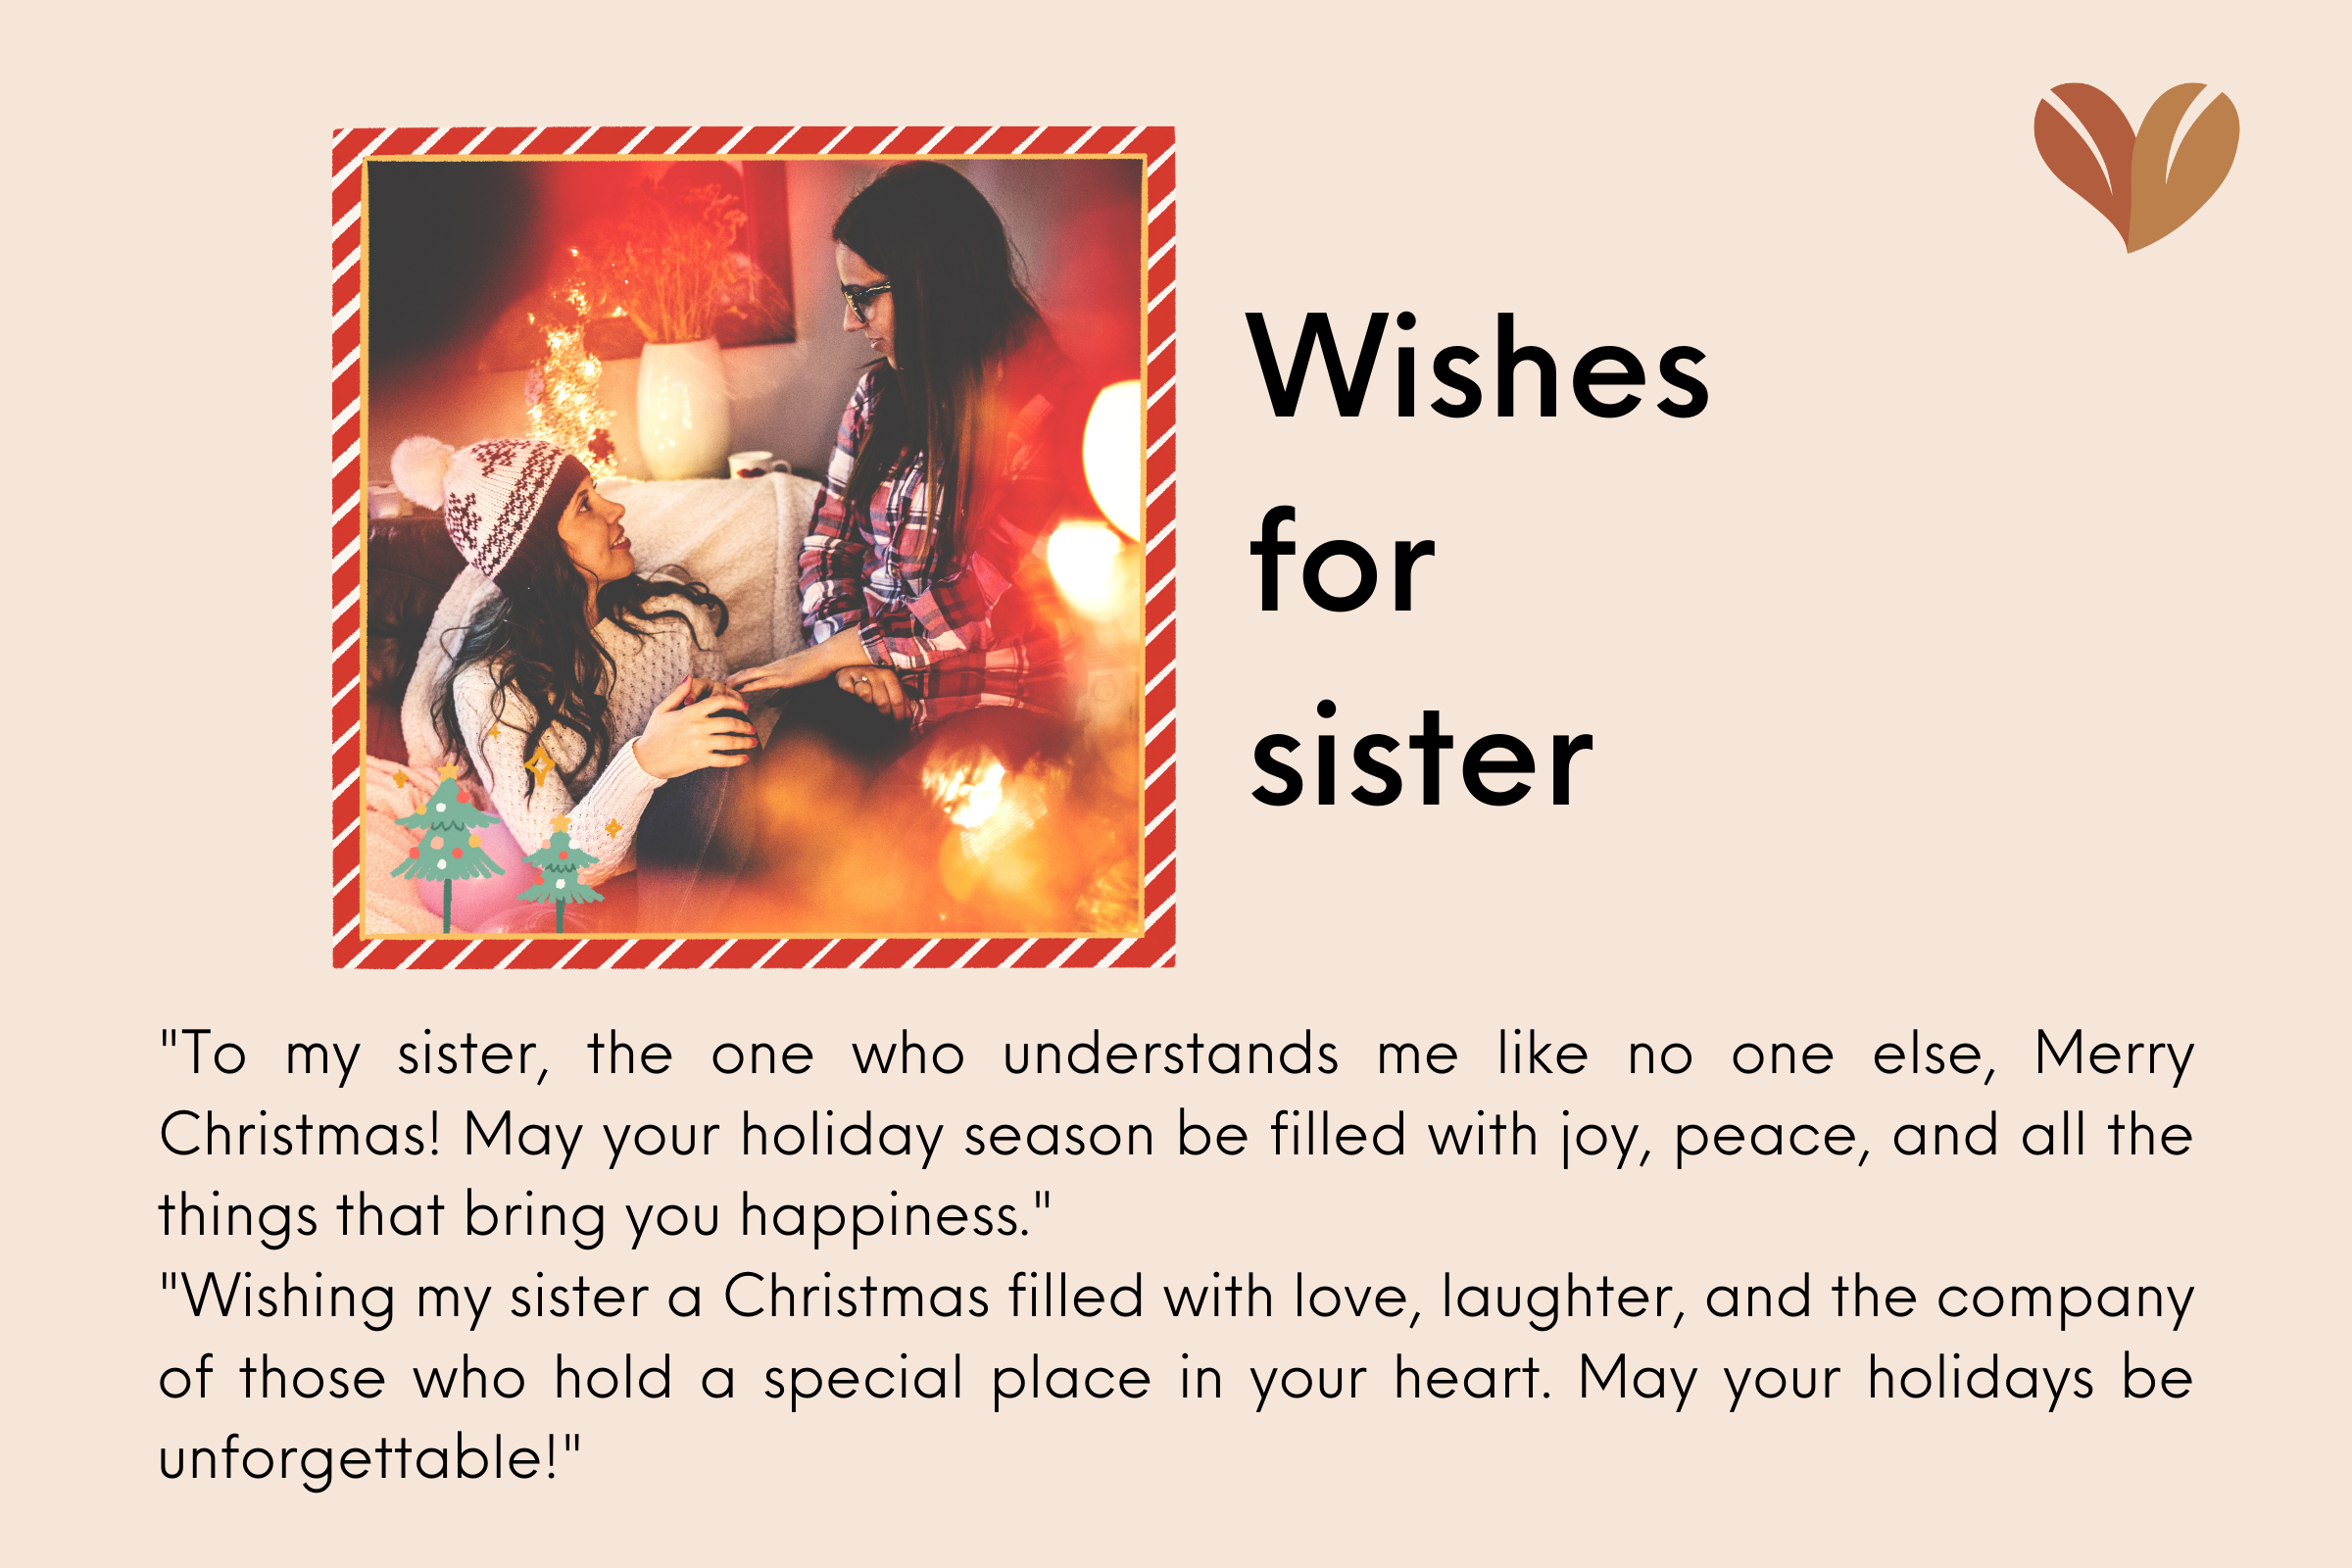 Wishes to sister that make her happy: Merry christmas to family